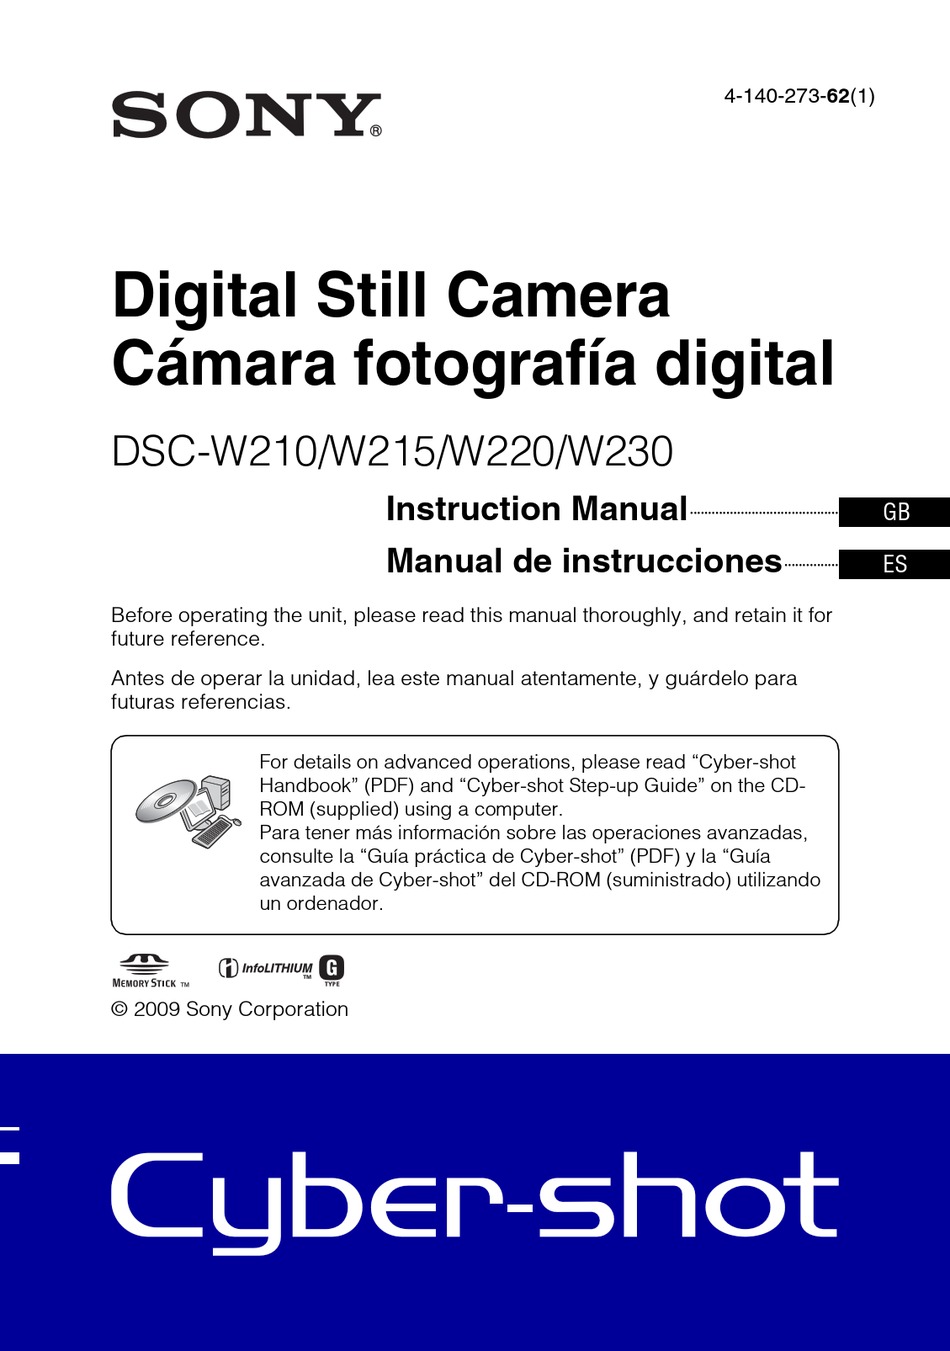 Sony Cybershot DSC-W210 user manual (English - 129 pages)